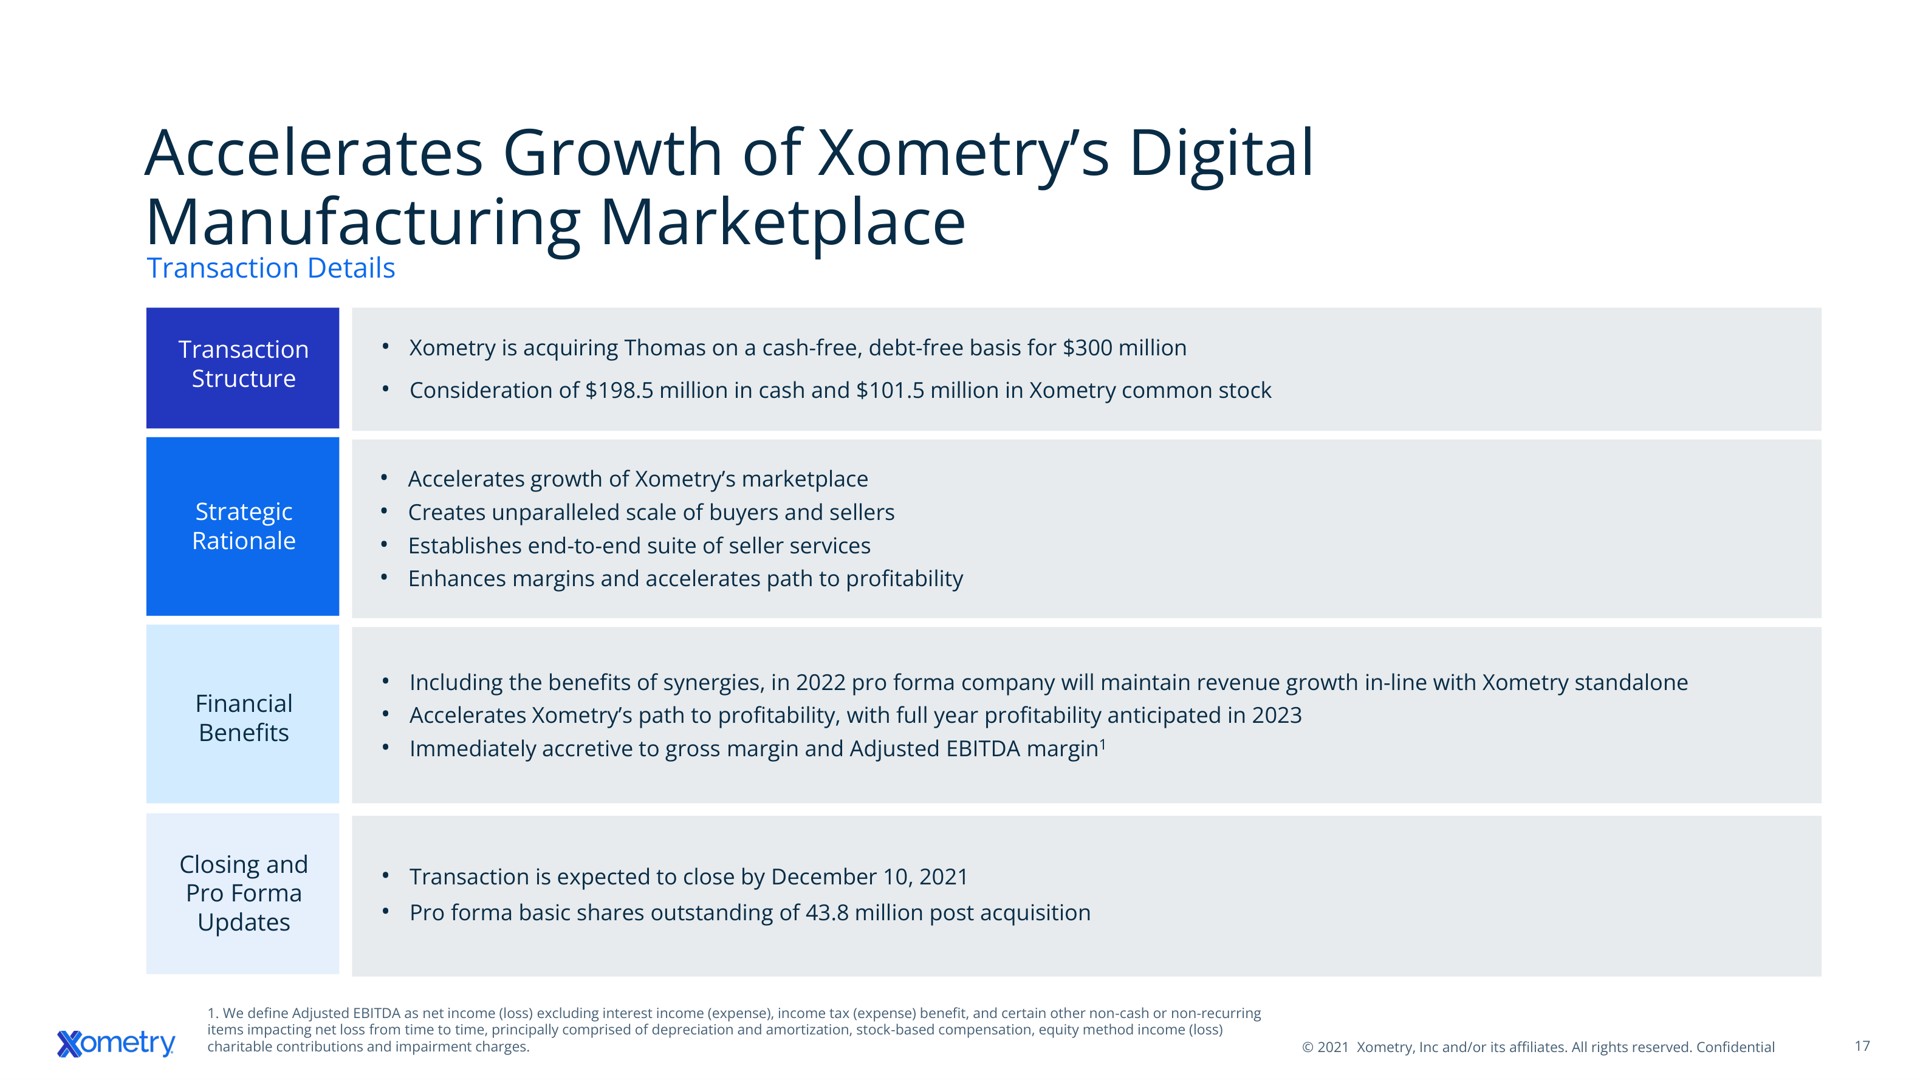 accelerates growth of digital manufacturing | Xometry